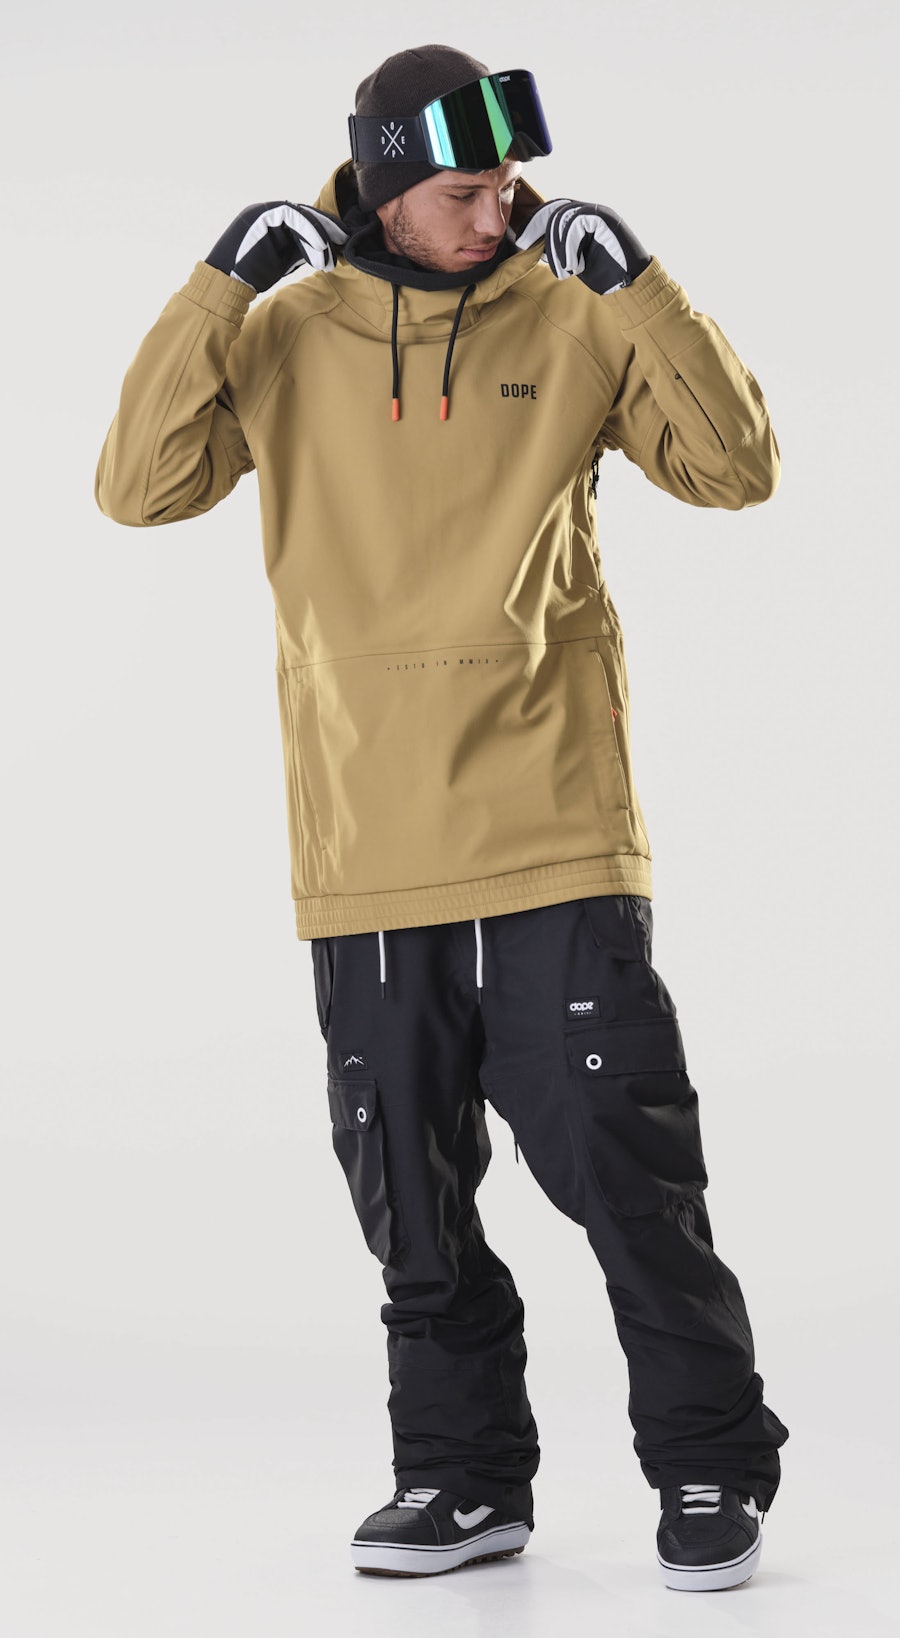 Dope Rogue Gold Snowboardoutfit Multi